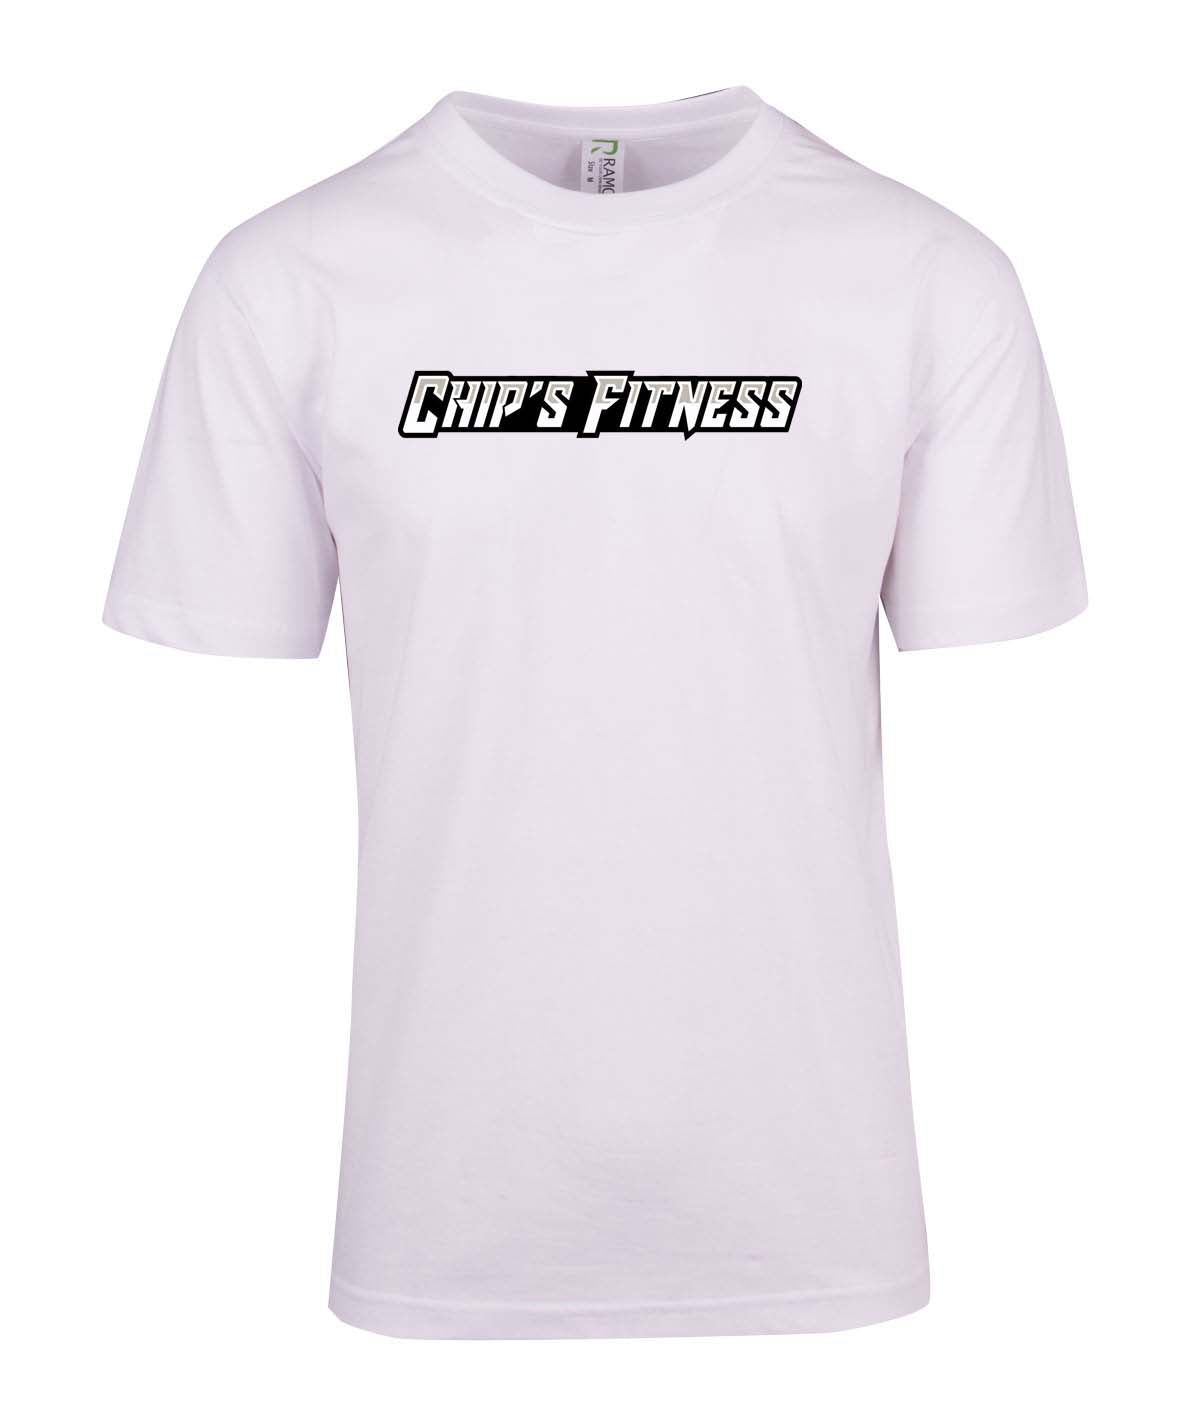 Chip's Fitness Double Sided T-shirt